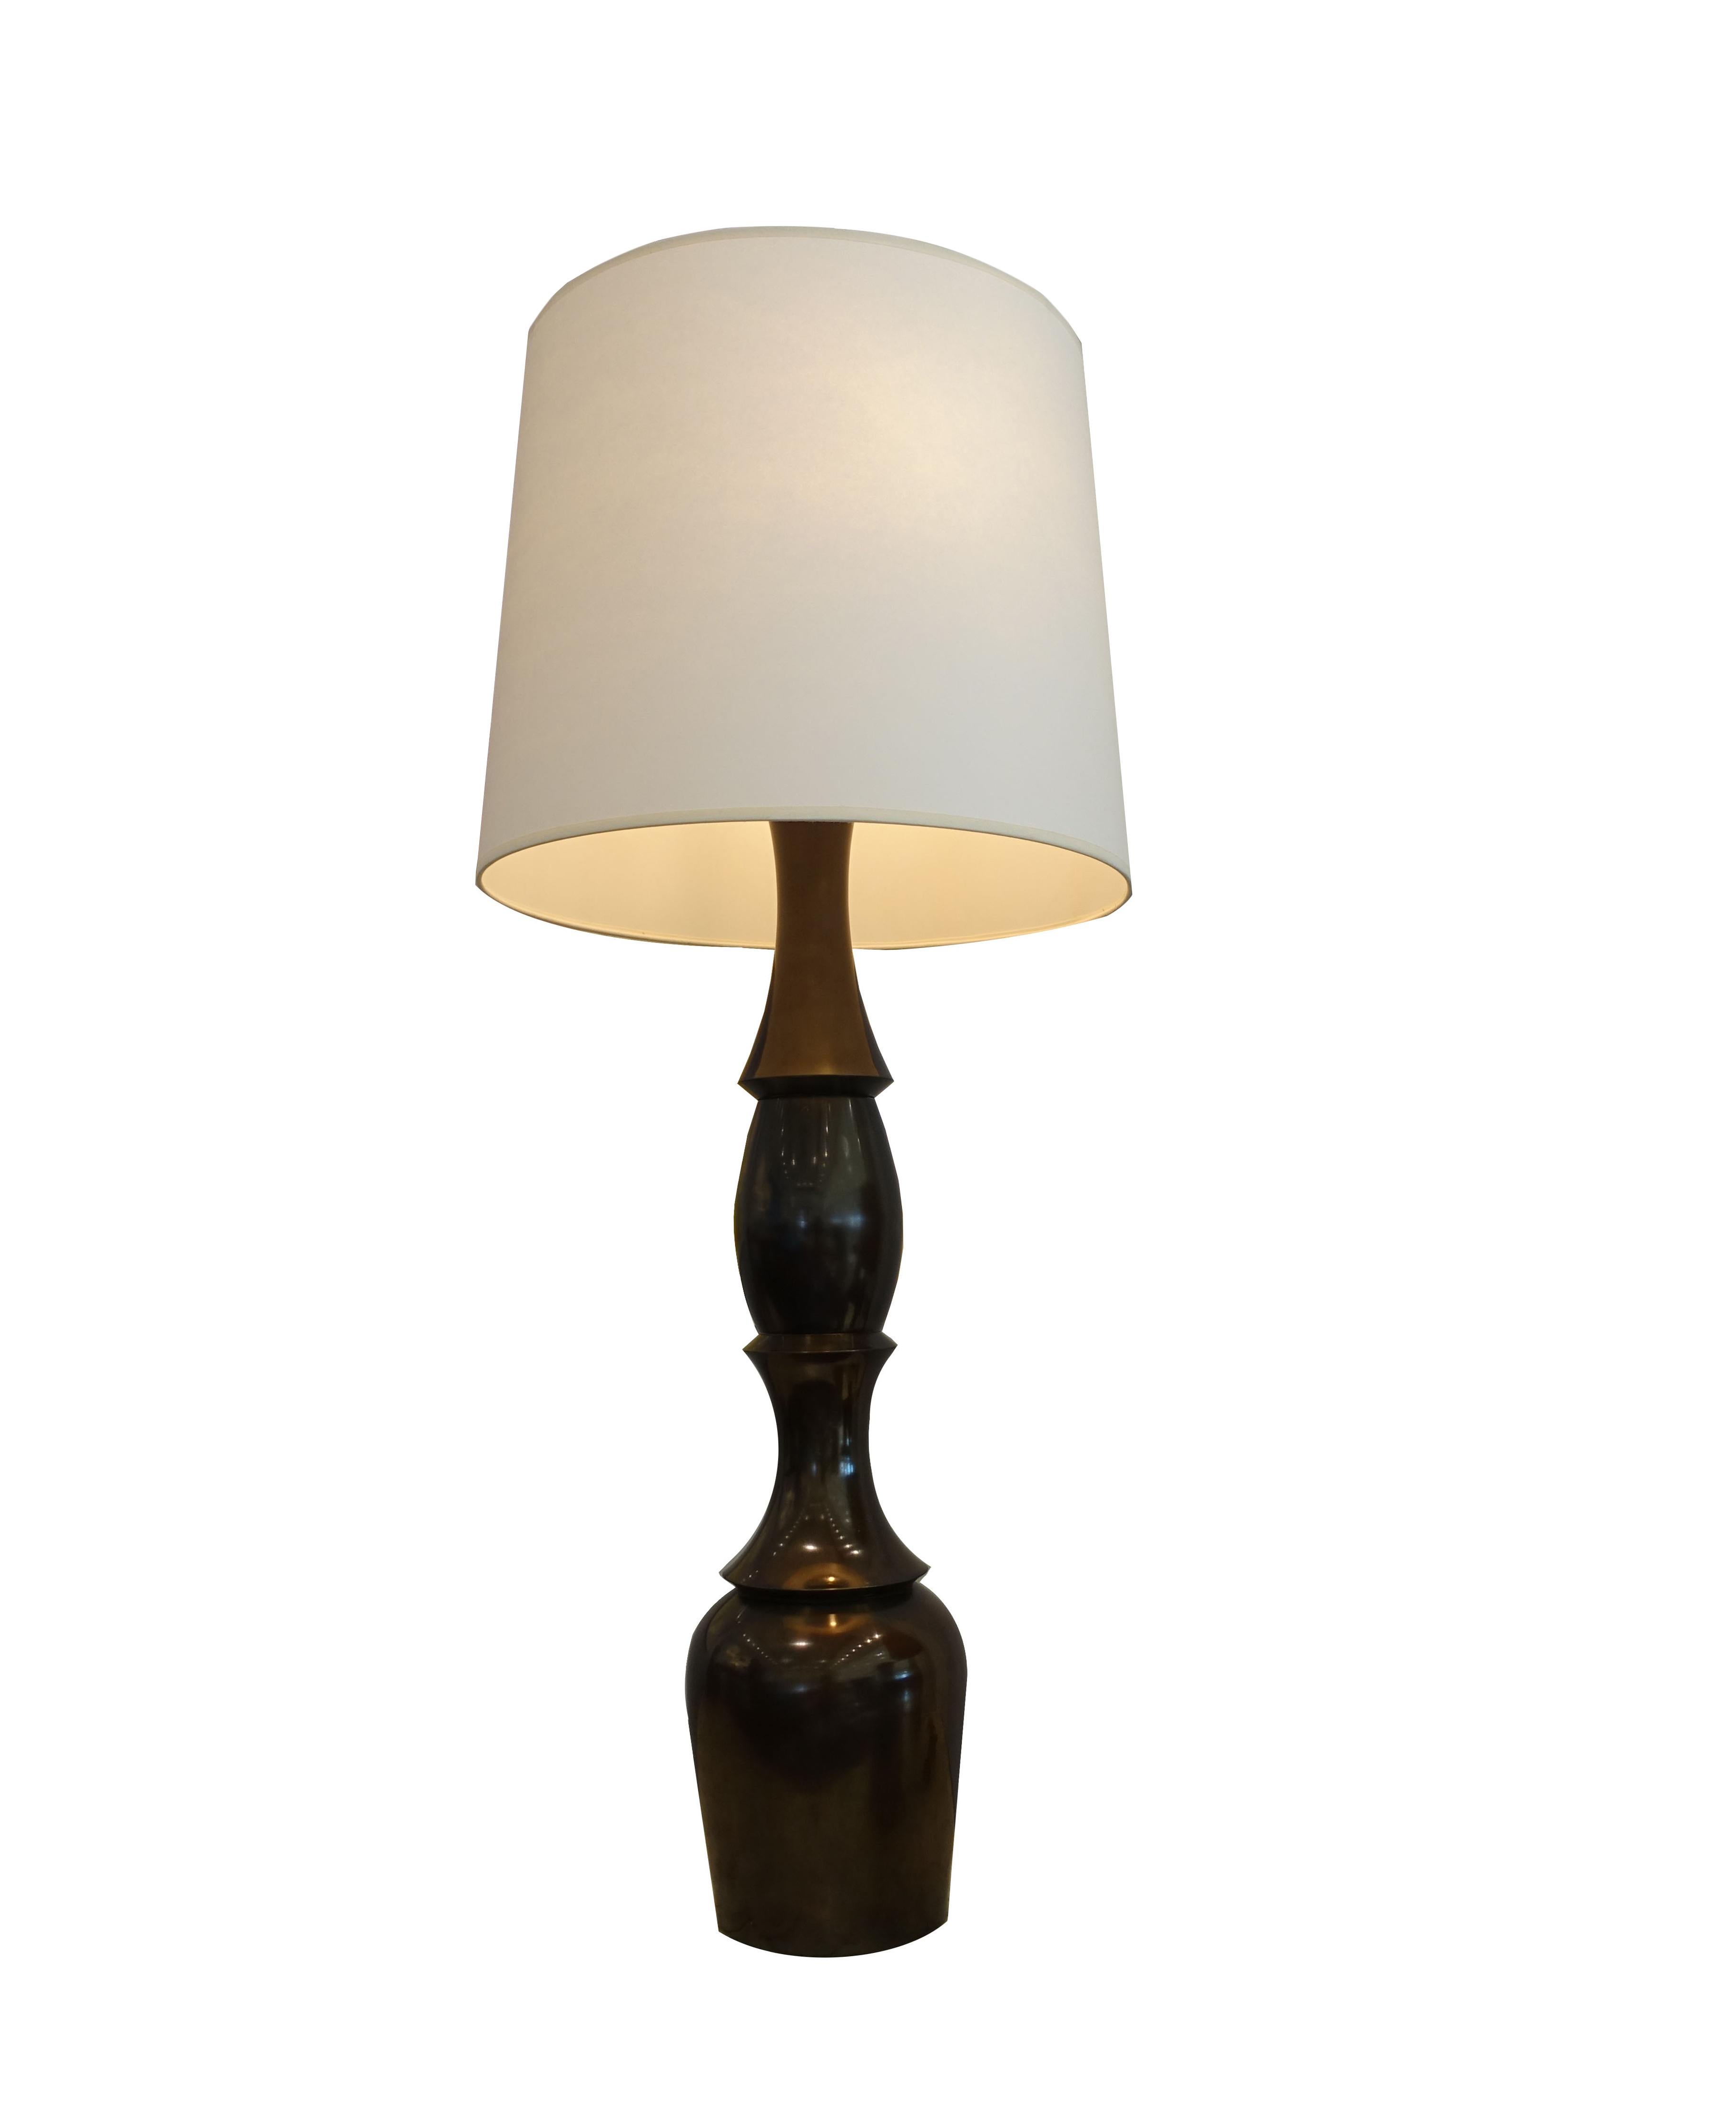 Oversized, unusual shape urn-style antique bronze table lamp. Newly rewired with dual pull chain light sockets and brass stem / finial. Brown twisted silk cord. Excellent vintage condition.